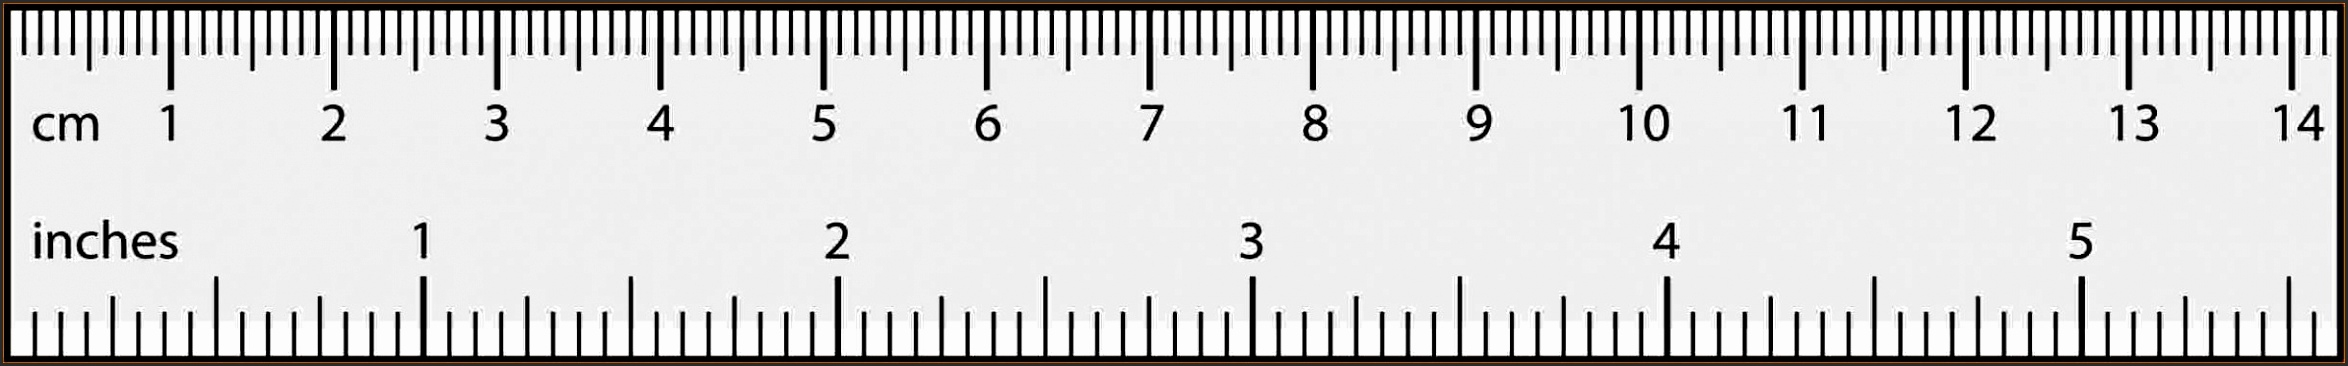 Centimeter Ruler Printable Free True to Scale.